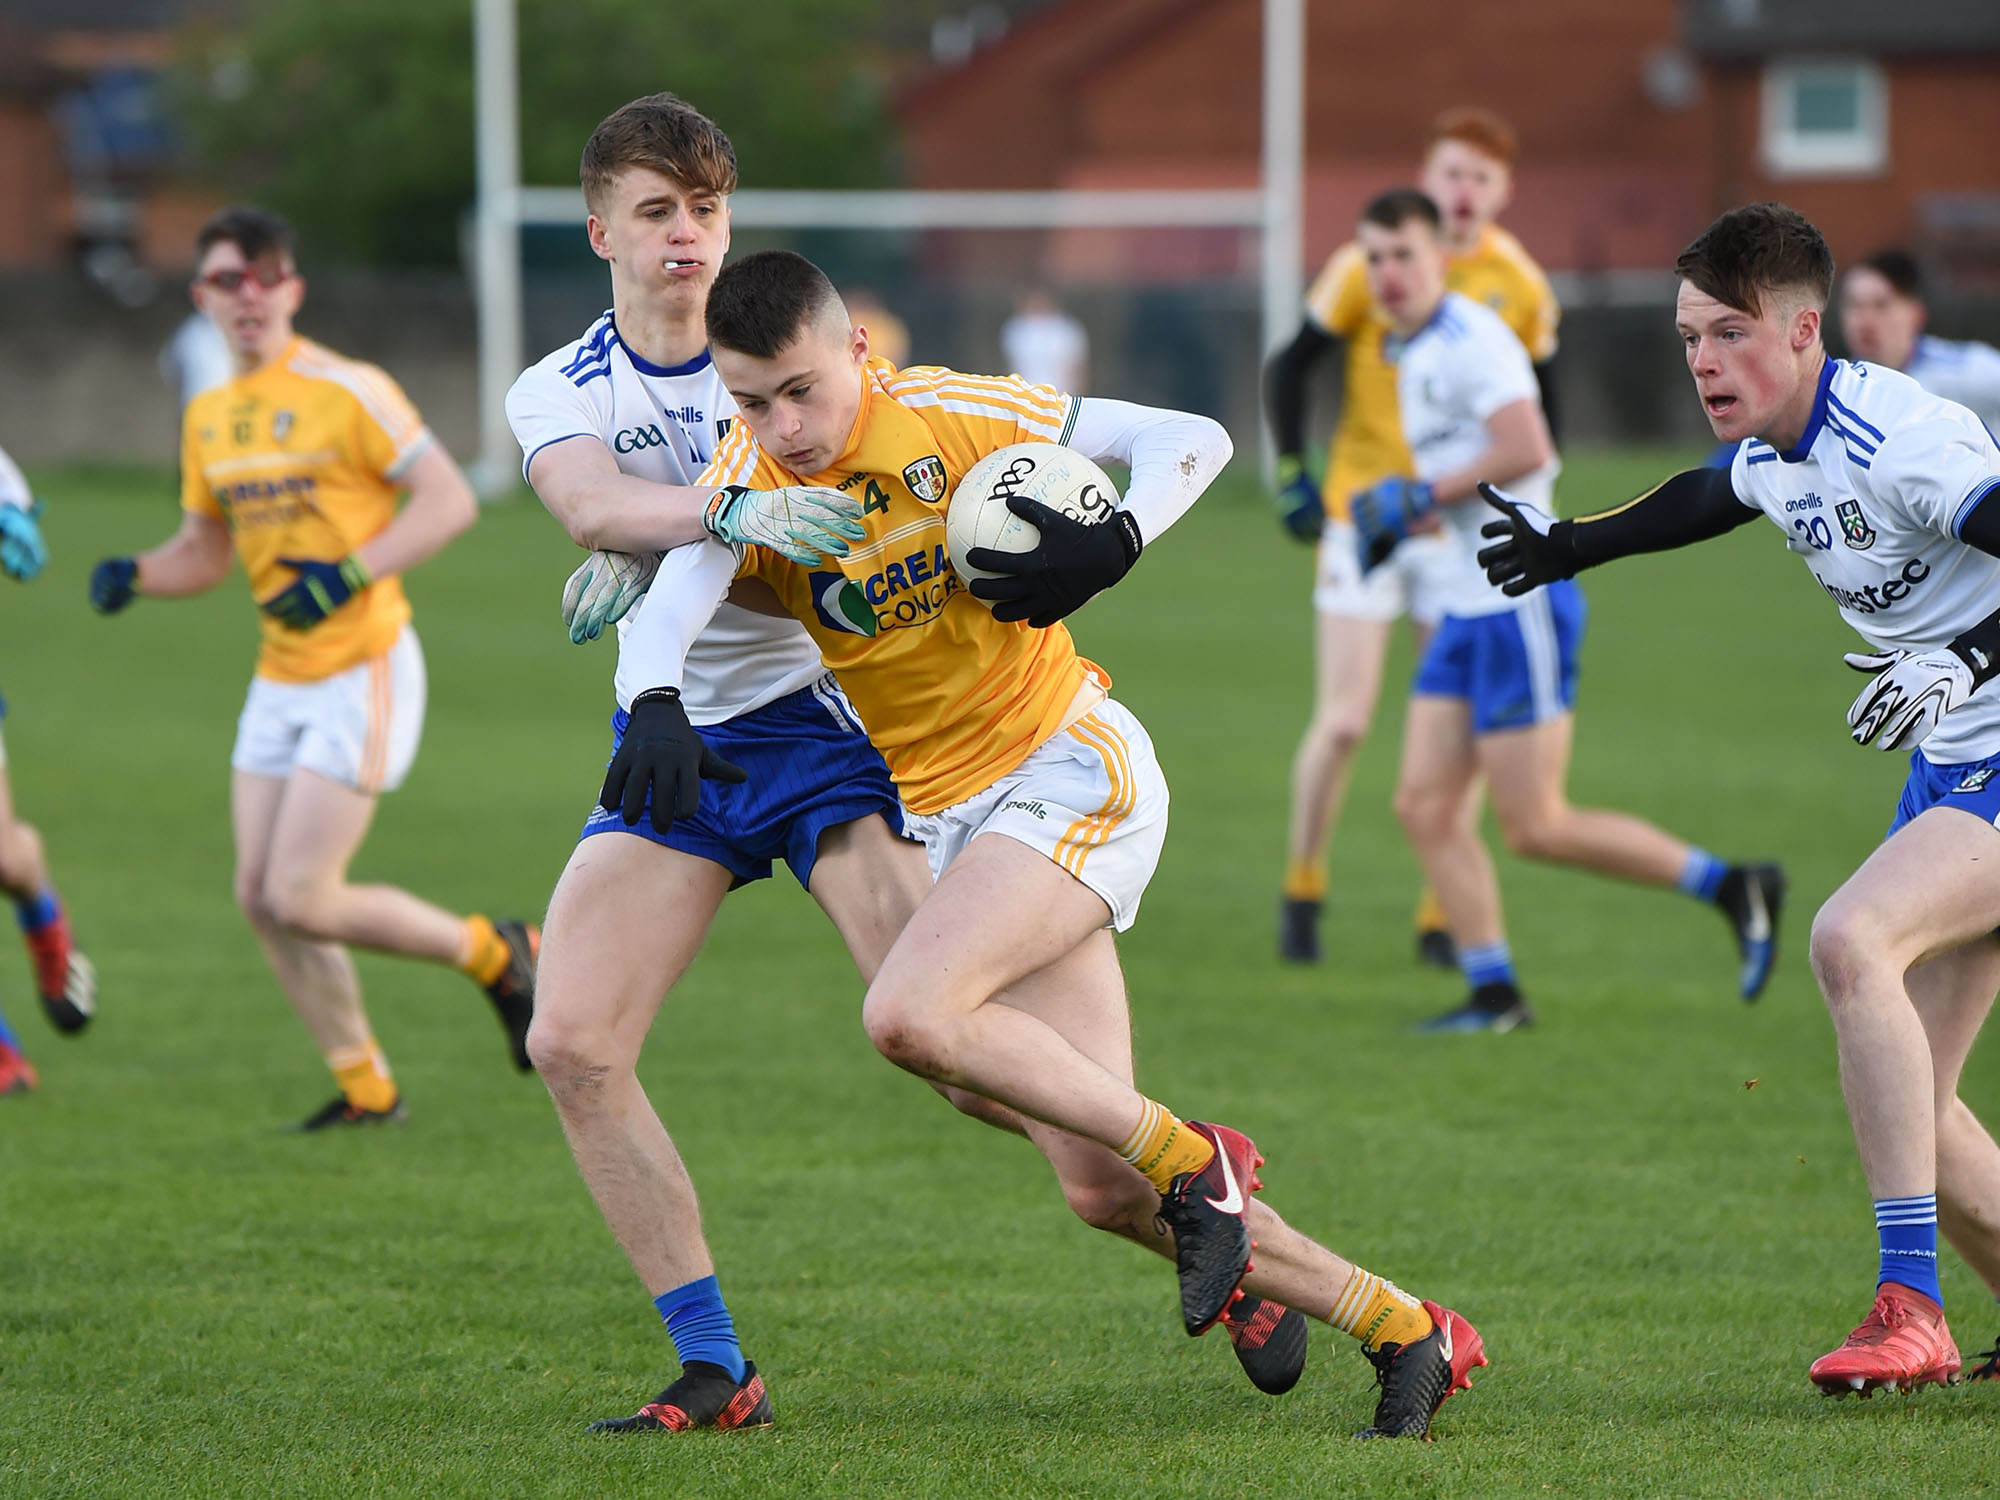 Antrim defender Michael Ferris comes under pressure from Monaghan’s Karl Gallagher during Saturday’s Ulster Minor Football Championship clash at Corrigan Park with the Farneymen claiming a narrow one-point win 